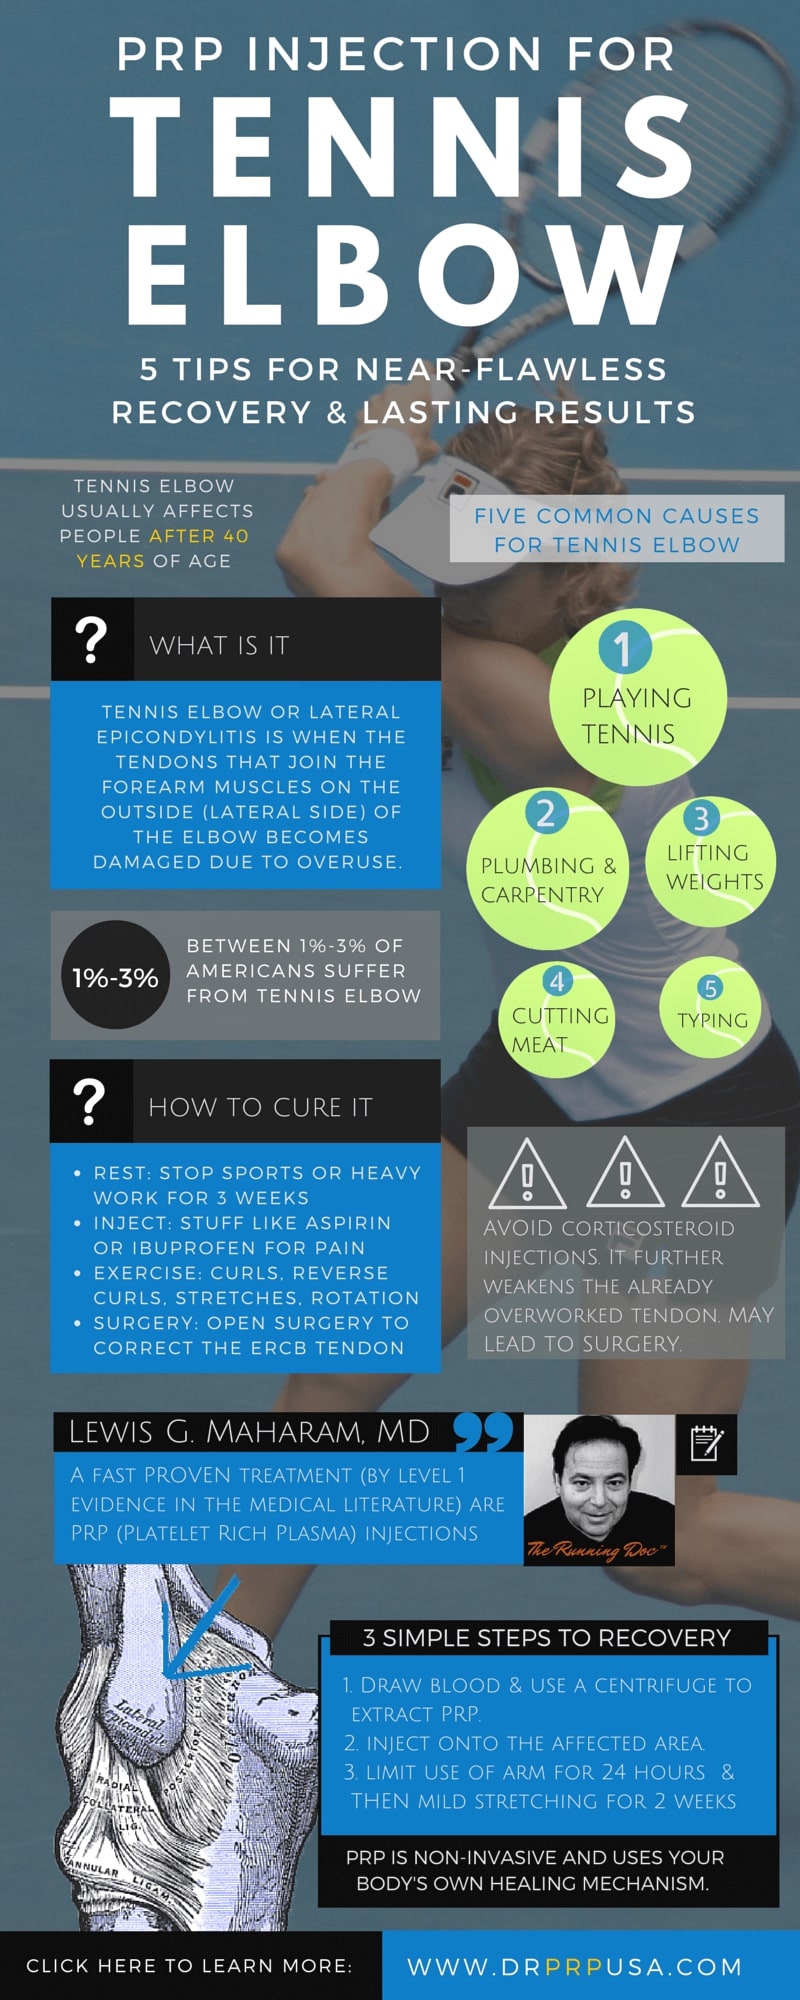 PRP Injection For Tennis Elbow: 5 Quick Tips [INFOGRAPHIC]